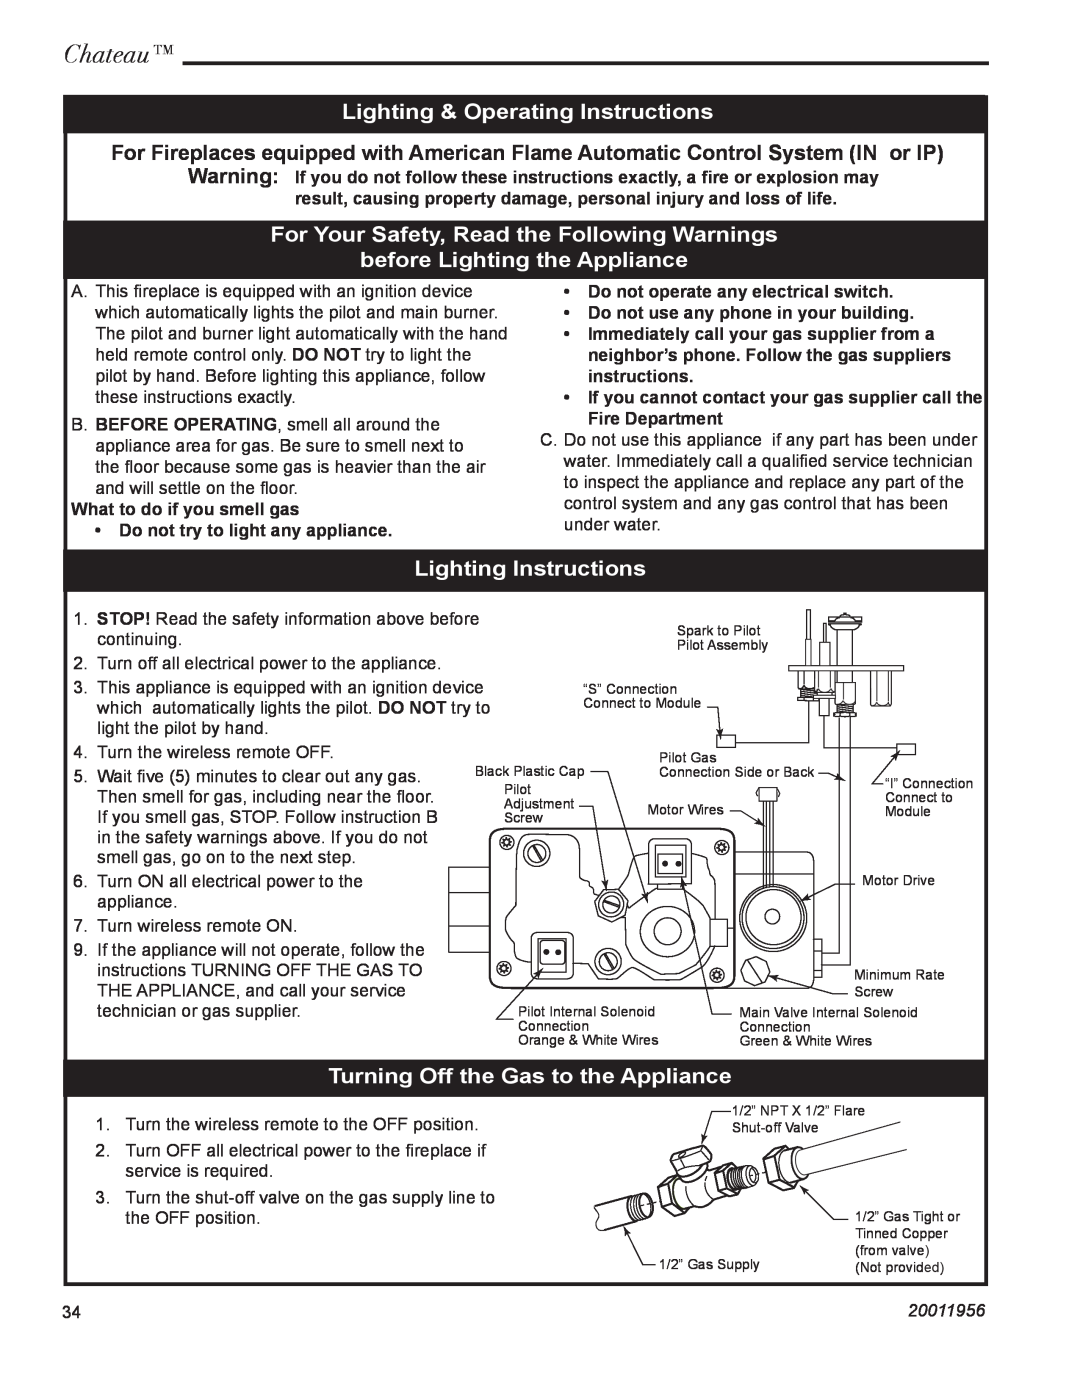 CFM Corporation DVT44IN Lighting & Operating Instructions, For Your Safety, Read the Following Warnings, Chateau, 20011956 